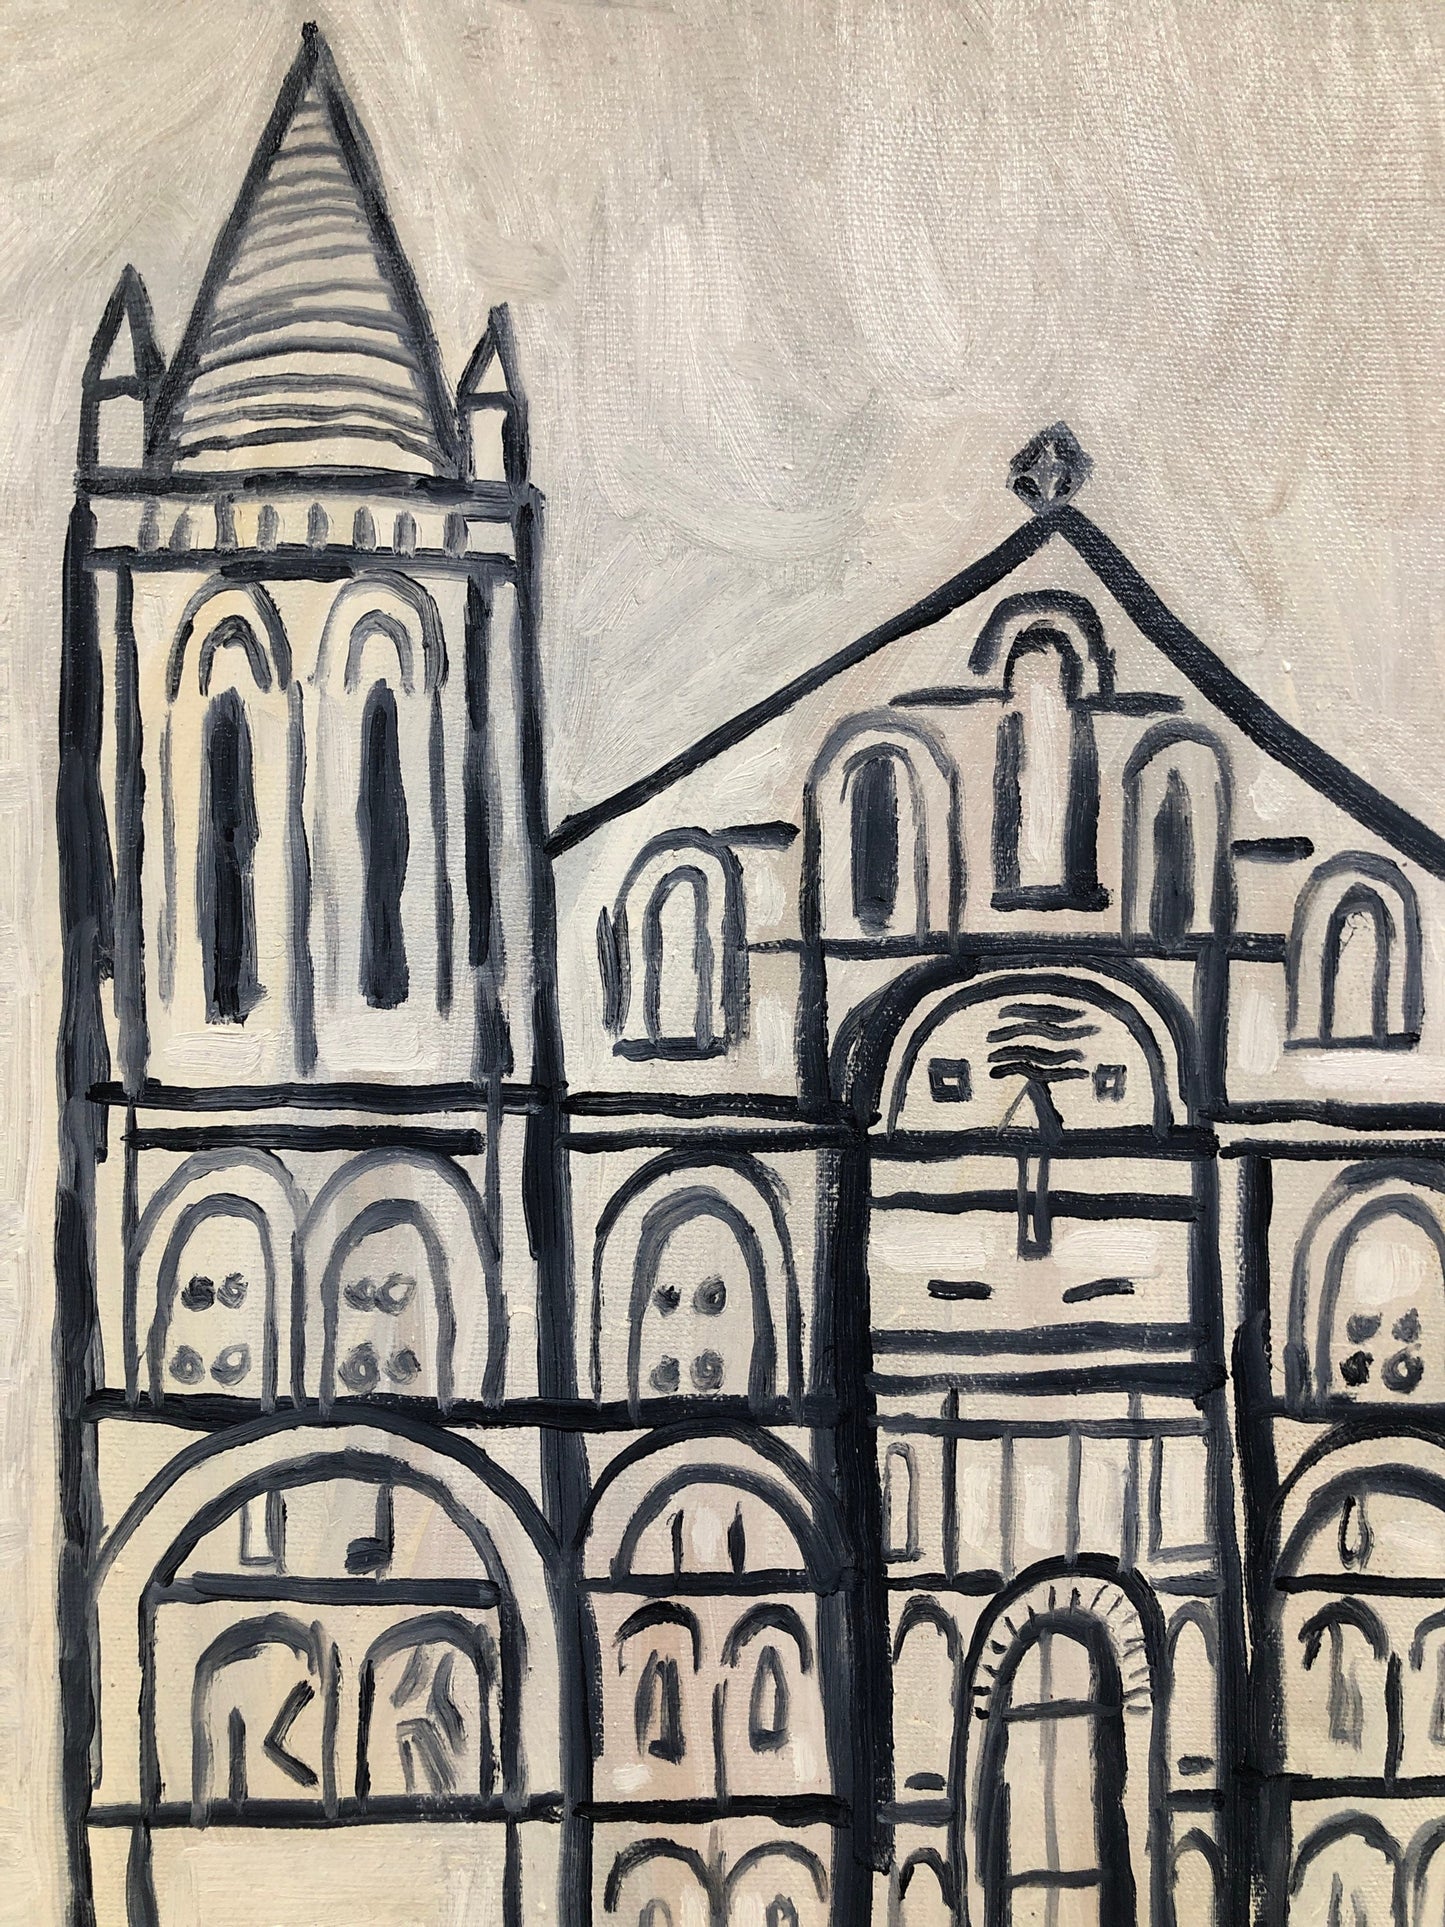 Cathedral. Oil painting on canvas. 16” x 20”. Church. Art. Original. Small. French. Kansas City. Kline. Wall.